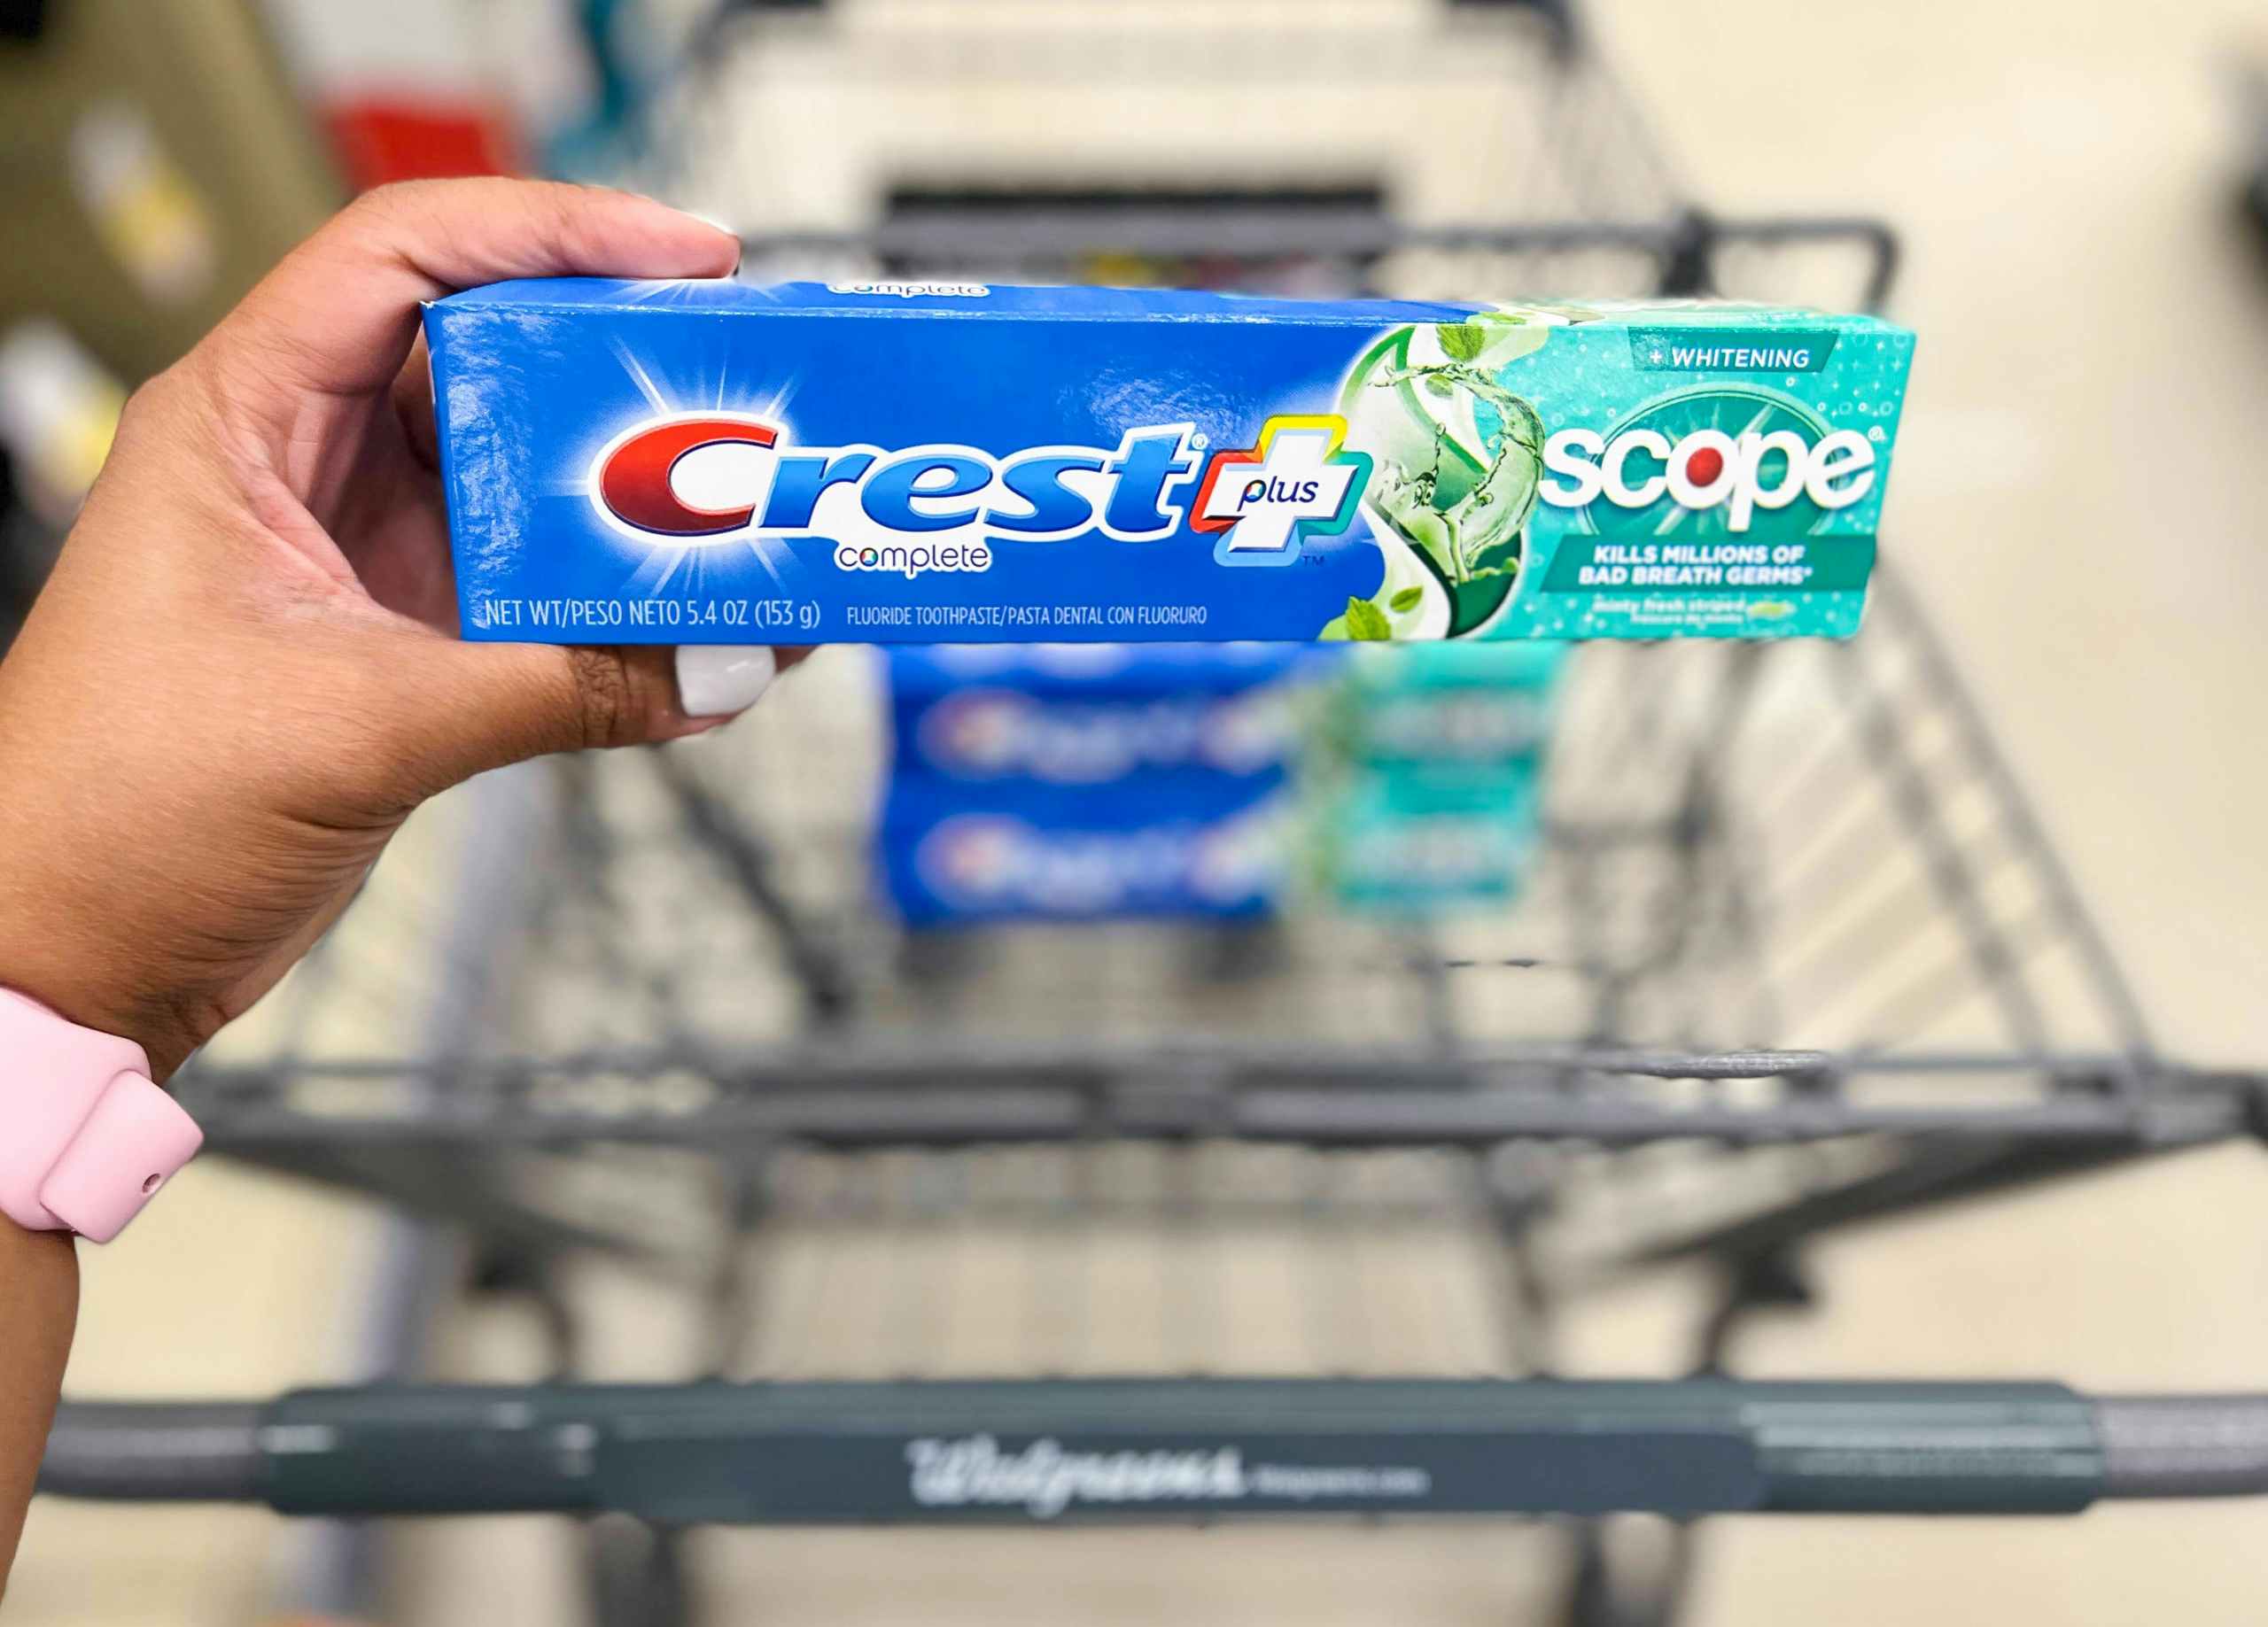 hand holding a box of Crest plus Scope toothpaste in front of shopping cart with two more boxes inside